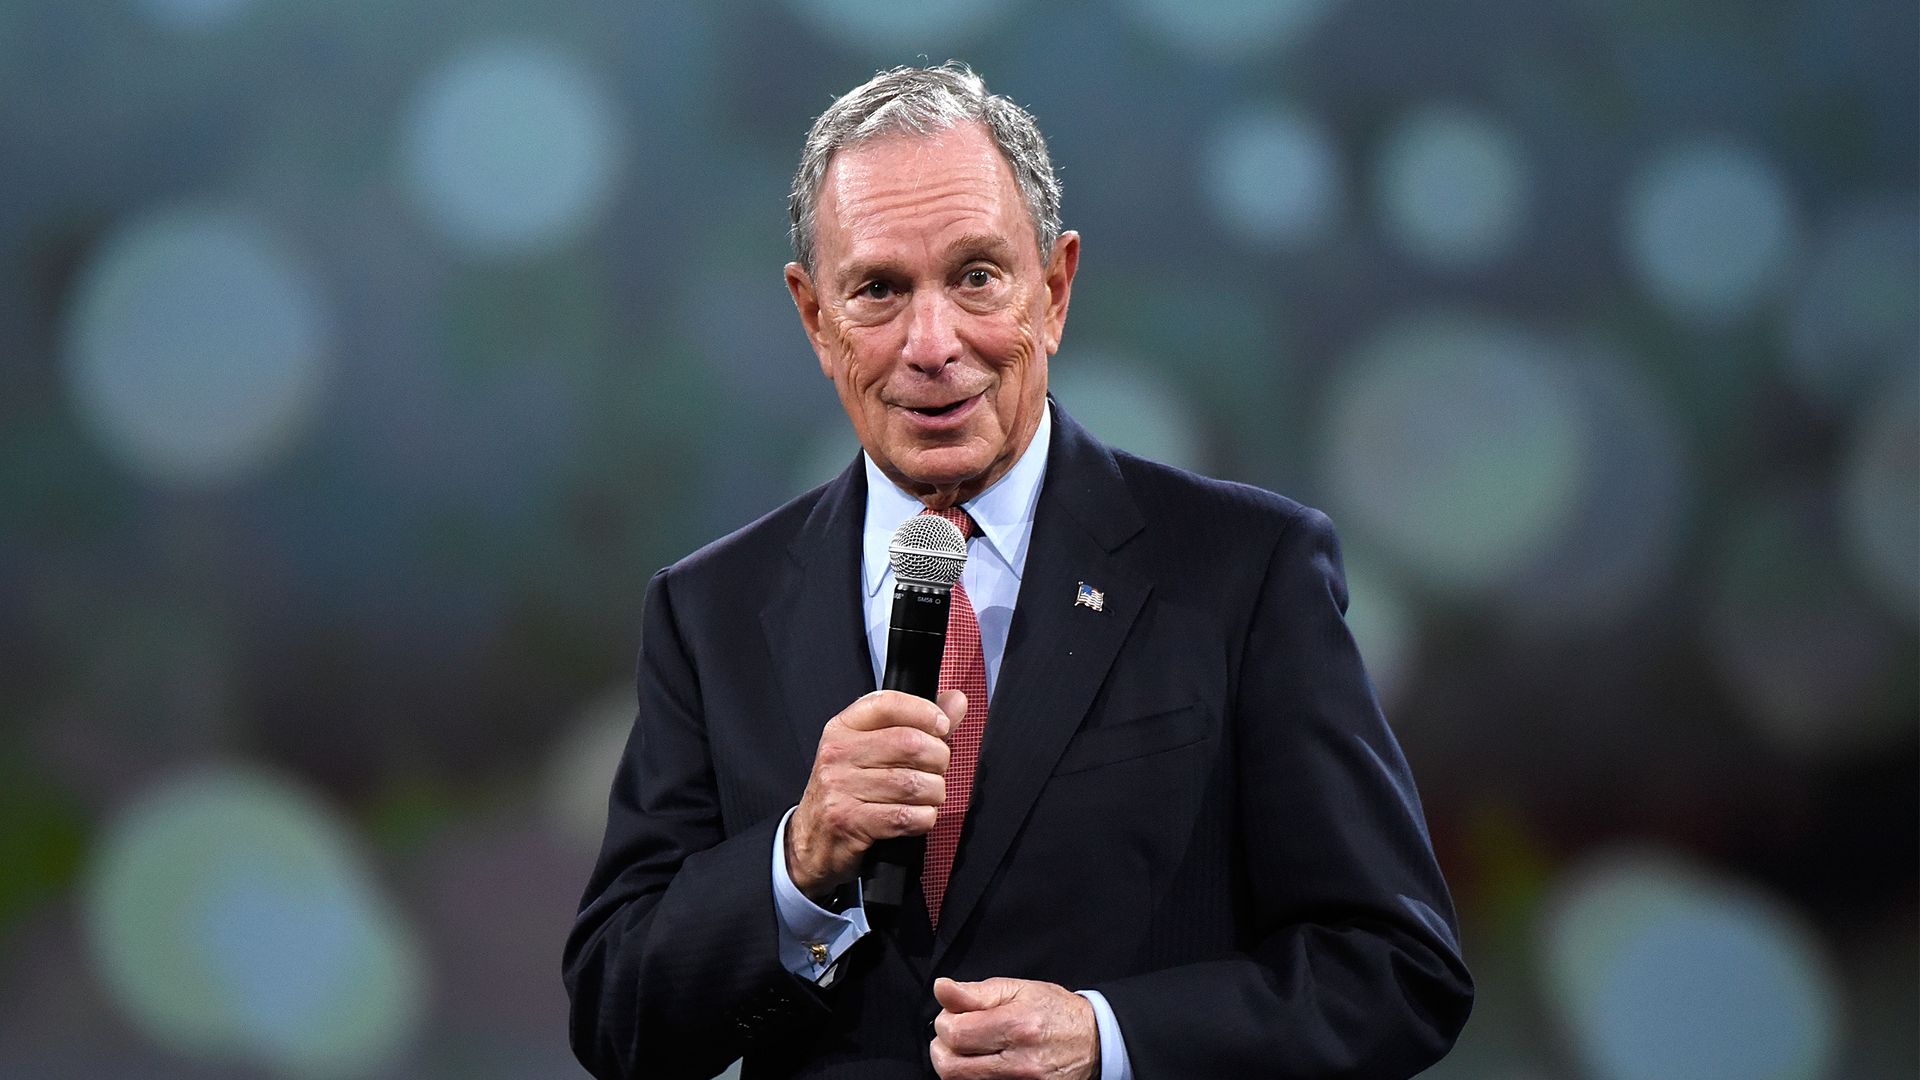 Michael Bloomberg with a mic in his hand